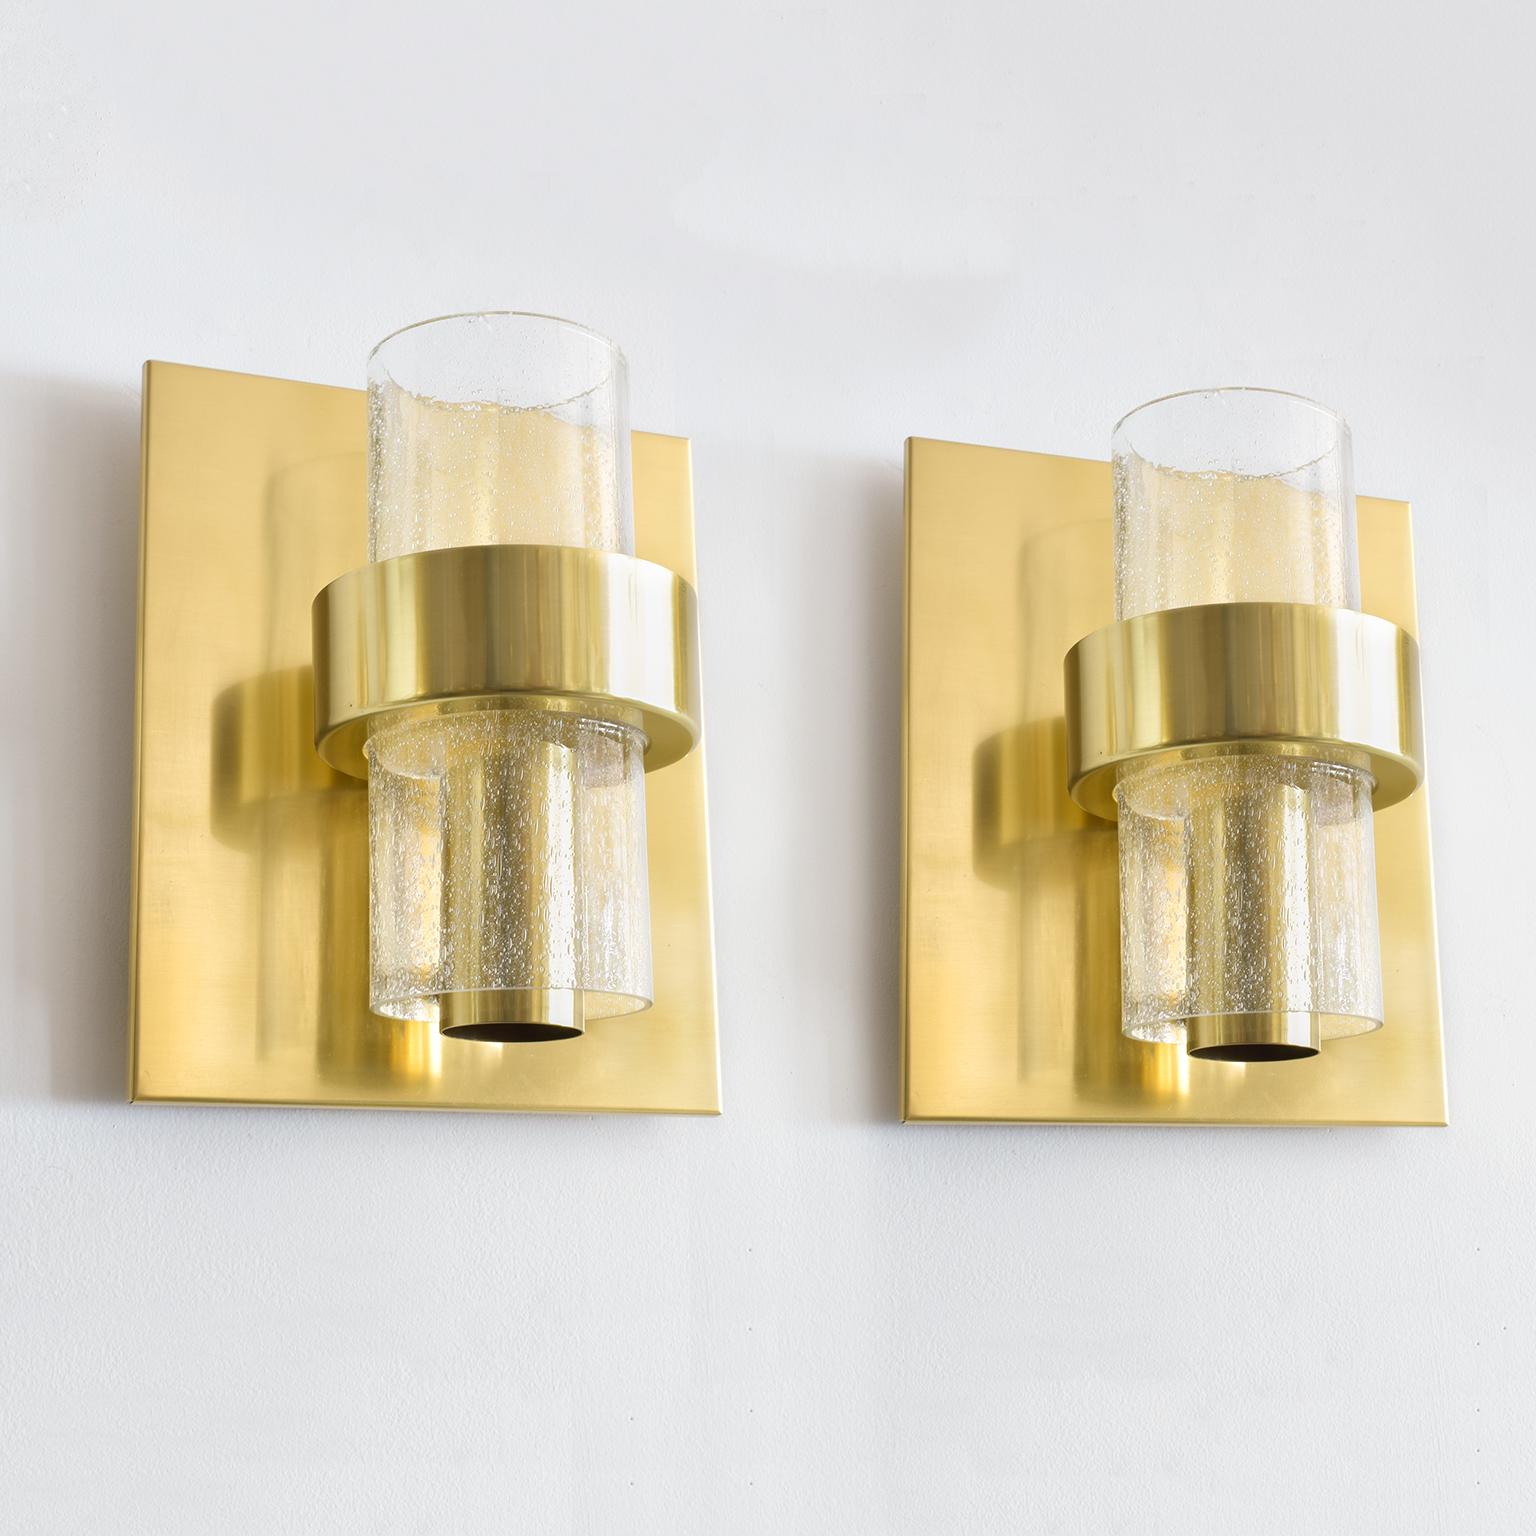 Pair of polished and lacquered brass sconces with hand-forged glass shades which contain decorative air bubbles. Each sconce has been rewired with one standard base socket for use in the USA. Designed by Jonas Hidle, for Hovik Verk, Lys, Norway,